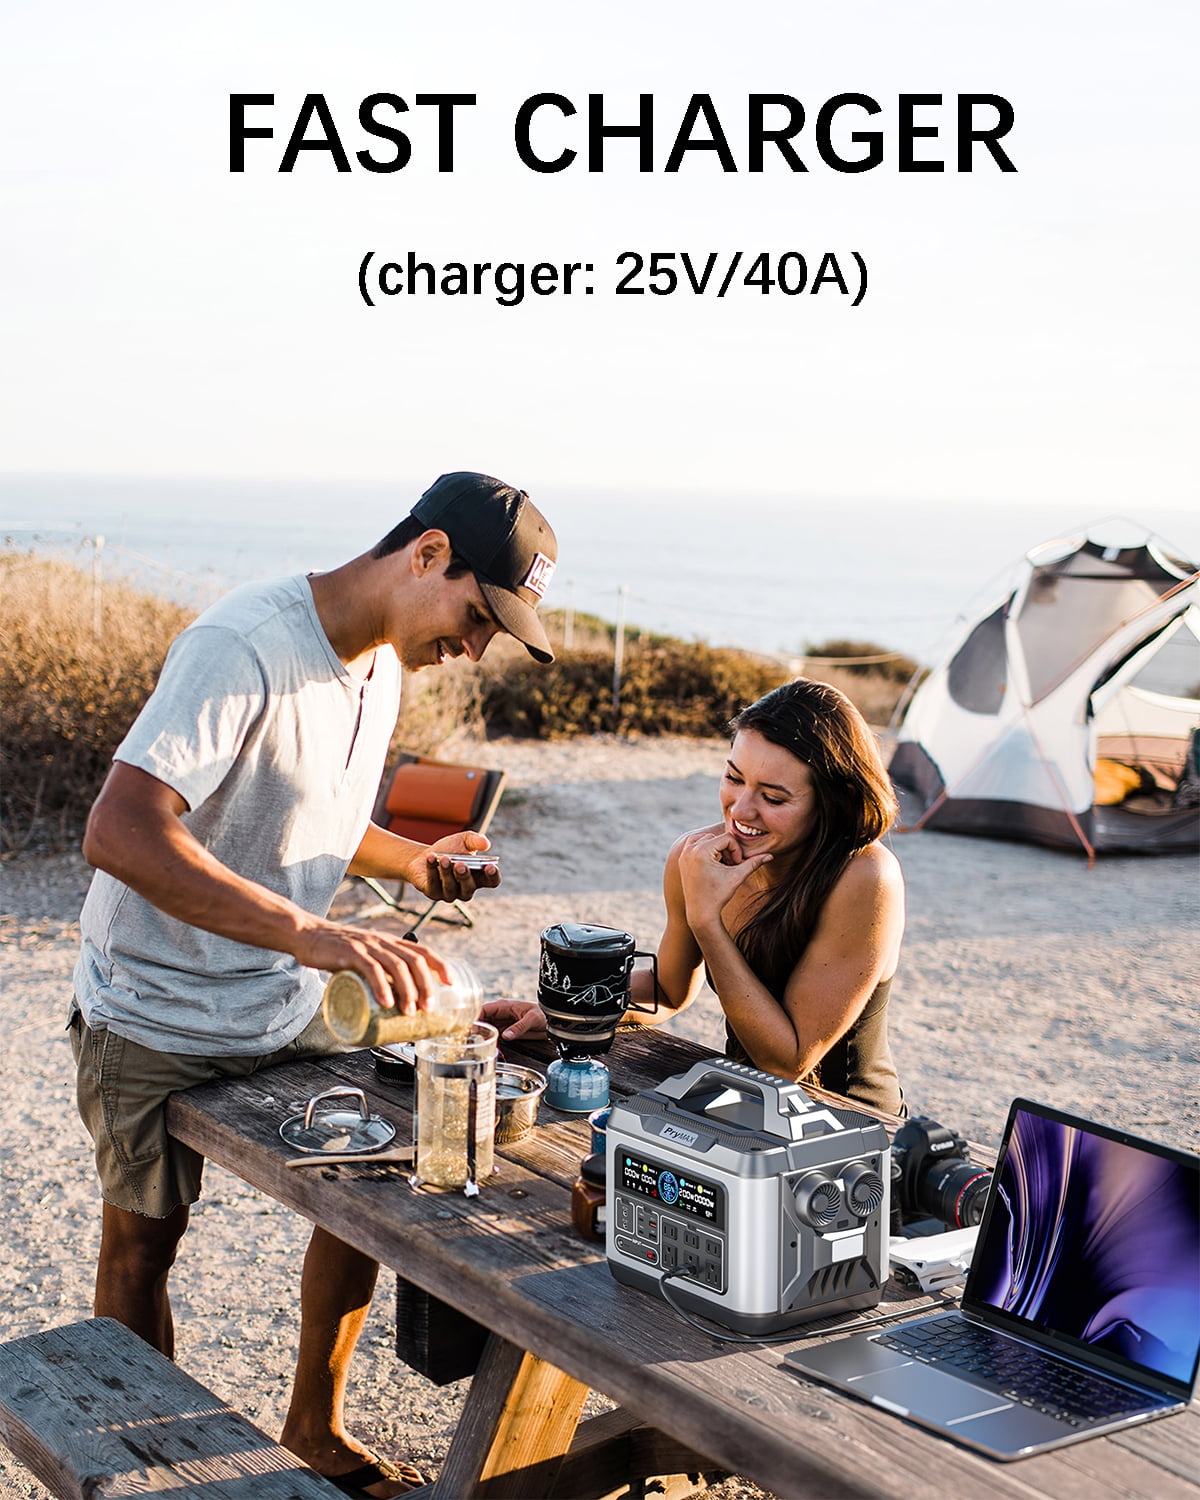 PryMAX Portable Power Station 300W, 296Wh Home Backup Battery AC Outlet,  Solar Generator for Outdoors Camping Travel Hunting Emergency